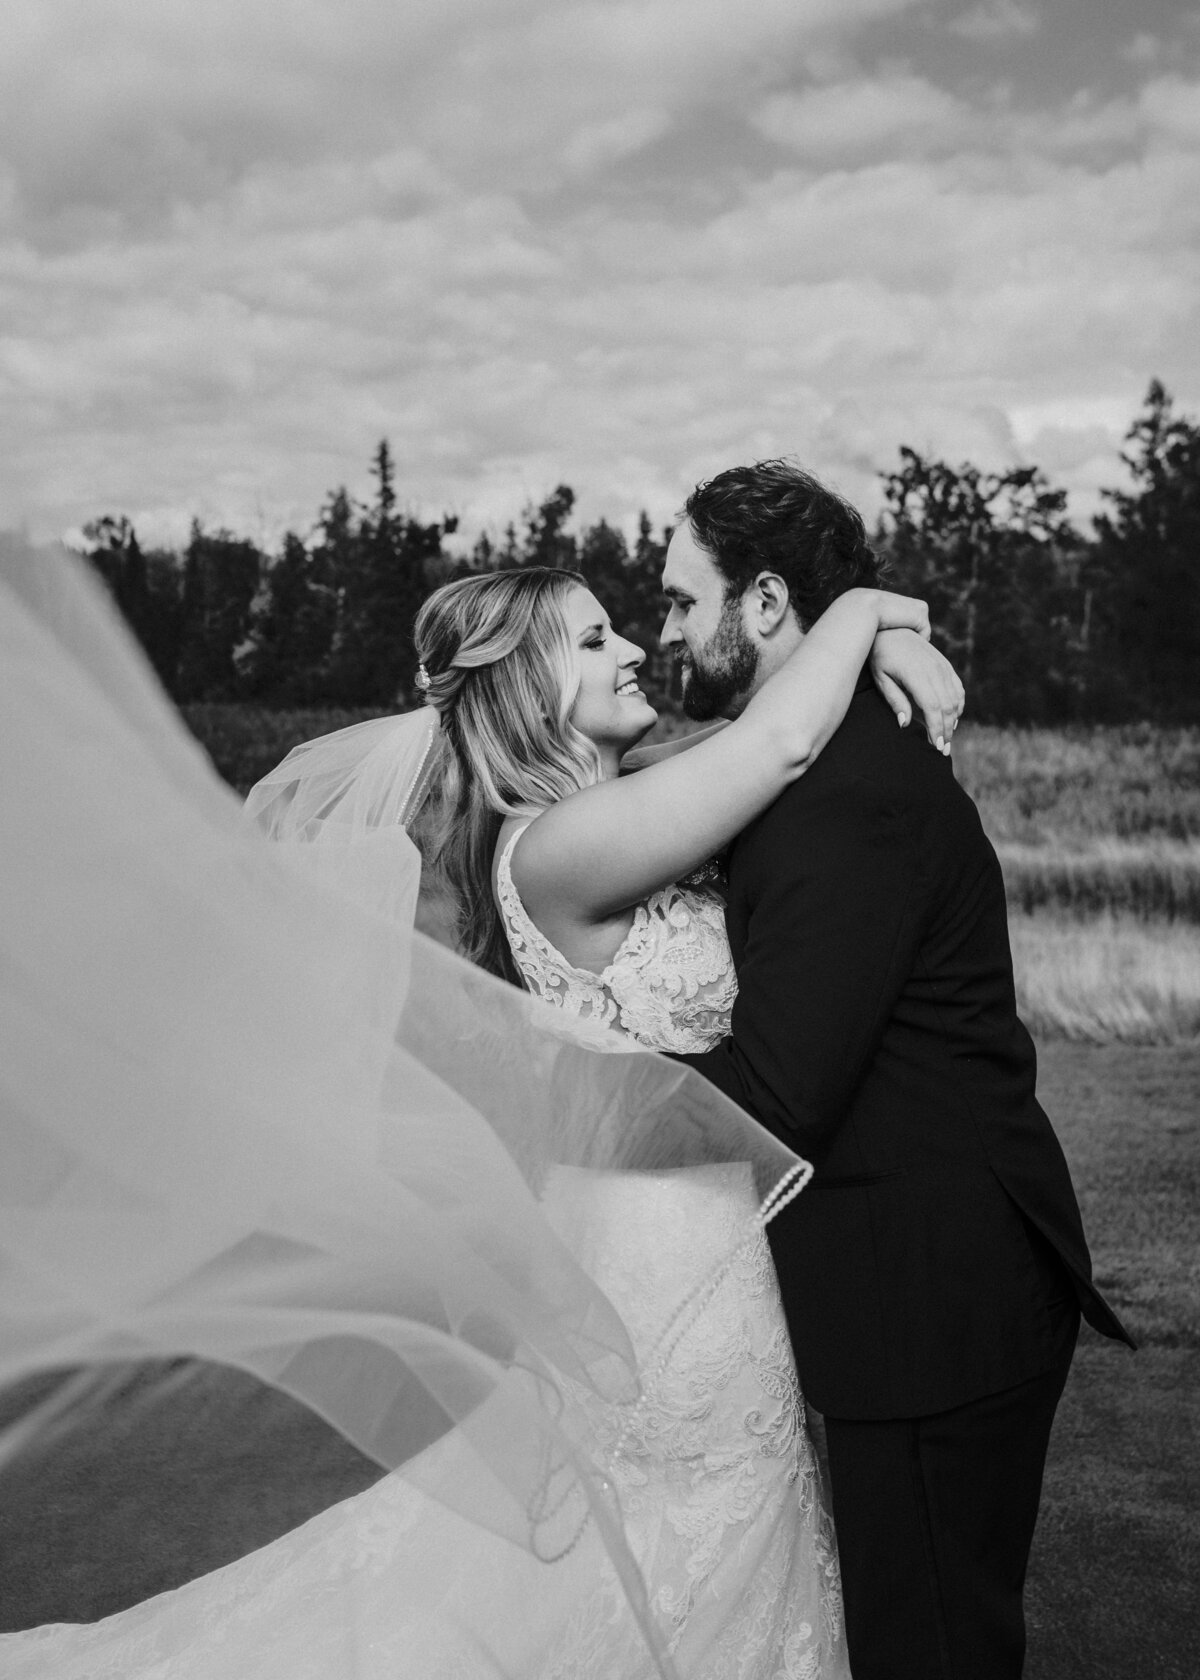 A tender moment captured in monochrome where a newlywed couple lovingly embrace, with the bride's veil caught in the gentle breeze taken by Jen Jarmuzek Photography Minneapolis wedding photographer